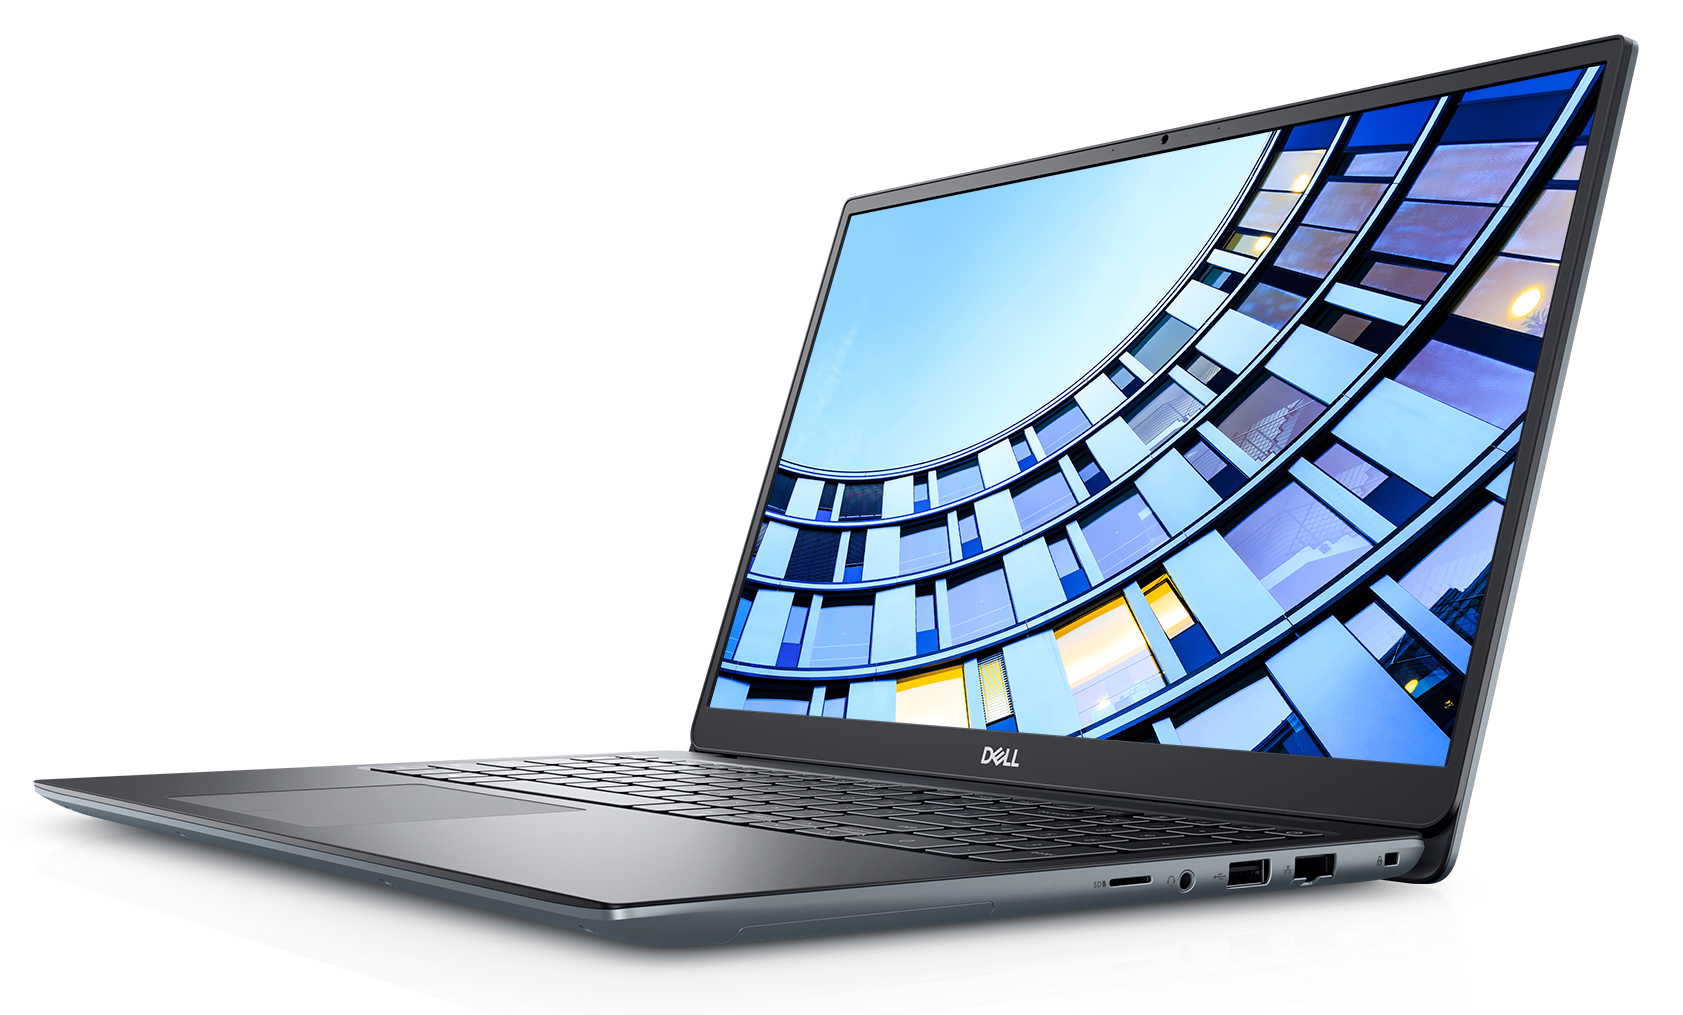 Dell refreshes XPS 13, Inspiron and Vostro lineup of laptops with new